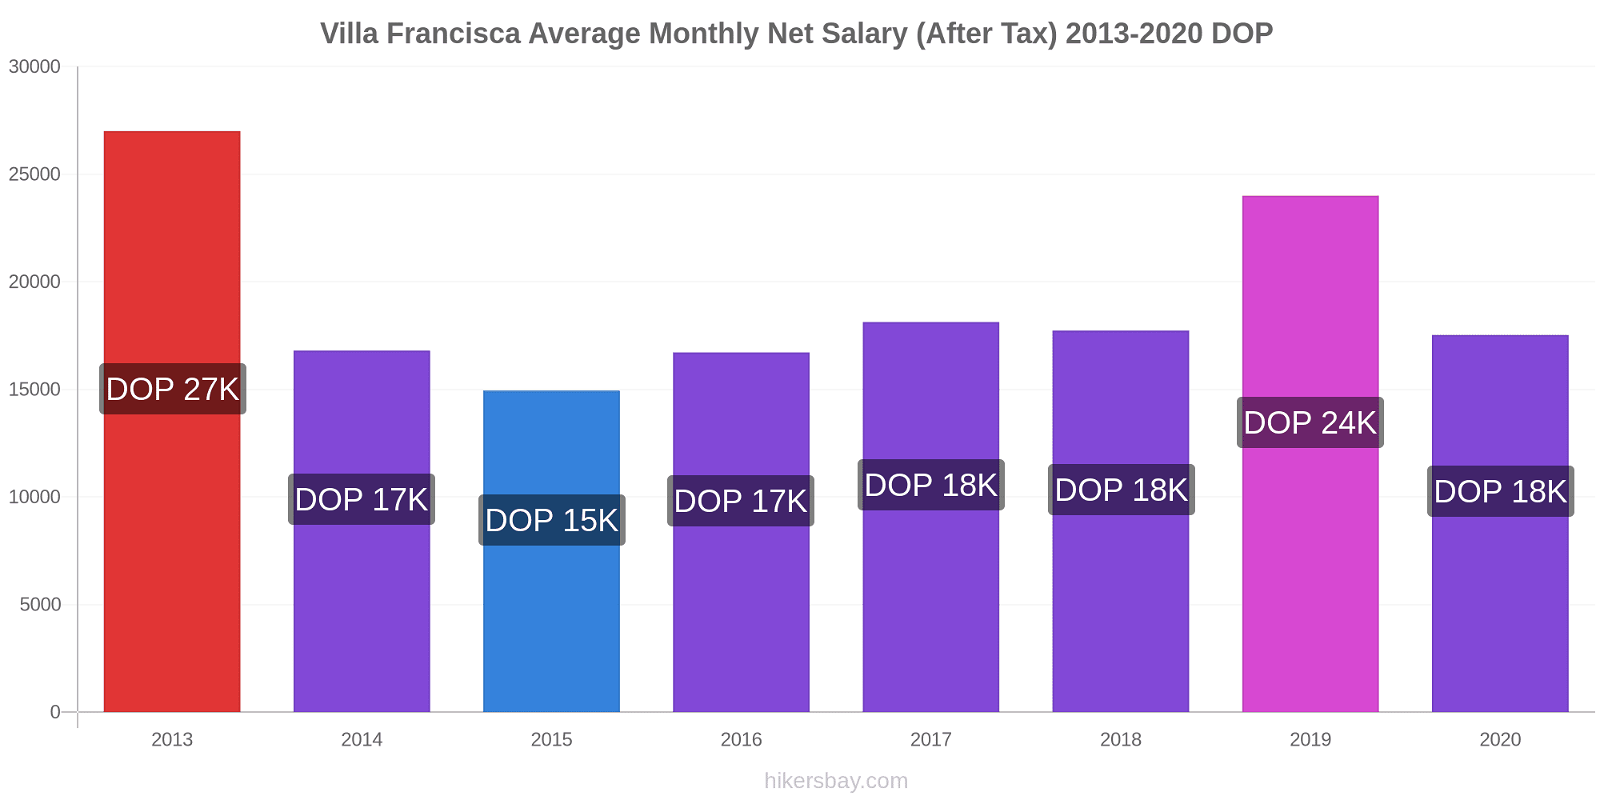 Villa Francisca price changes Average Monthly Net Salary (After Tax) hikersbay.com